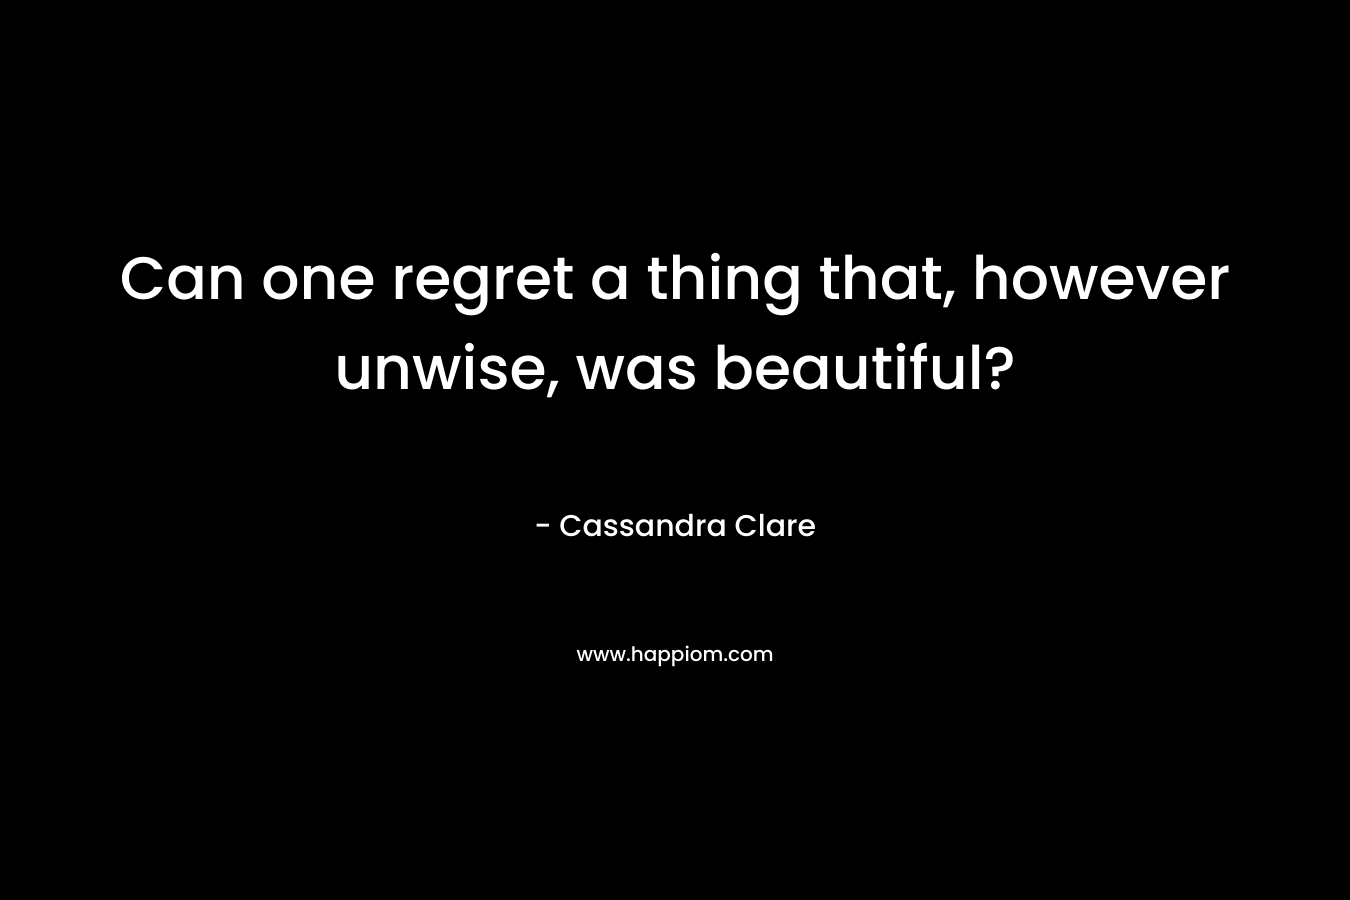 Can one regret a thing that, however unwise, was beautiful?